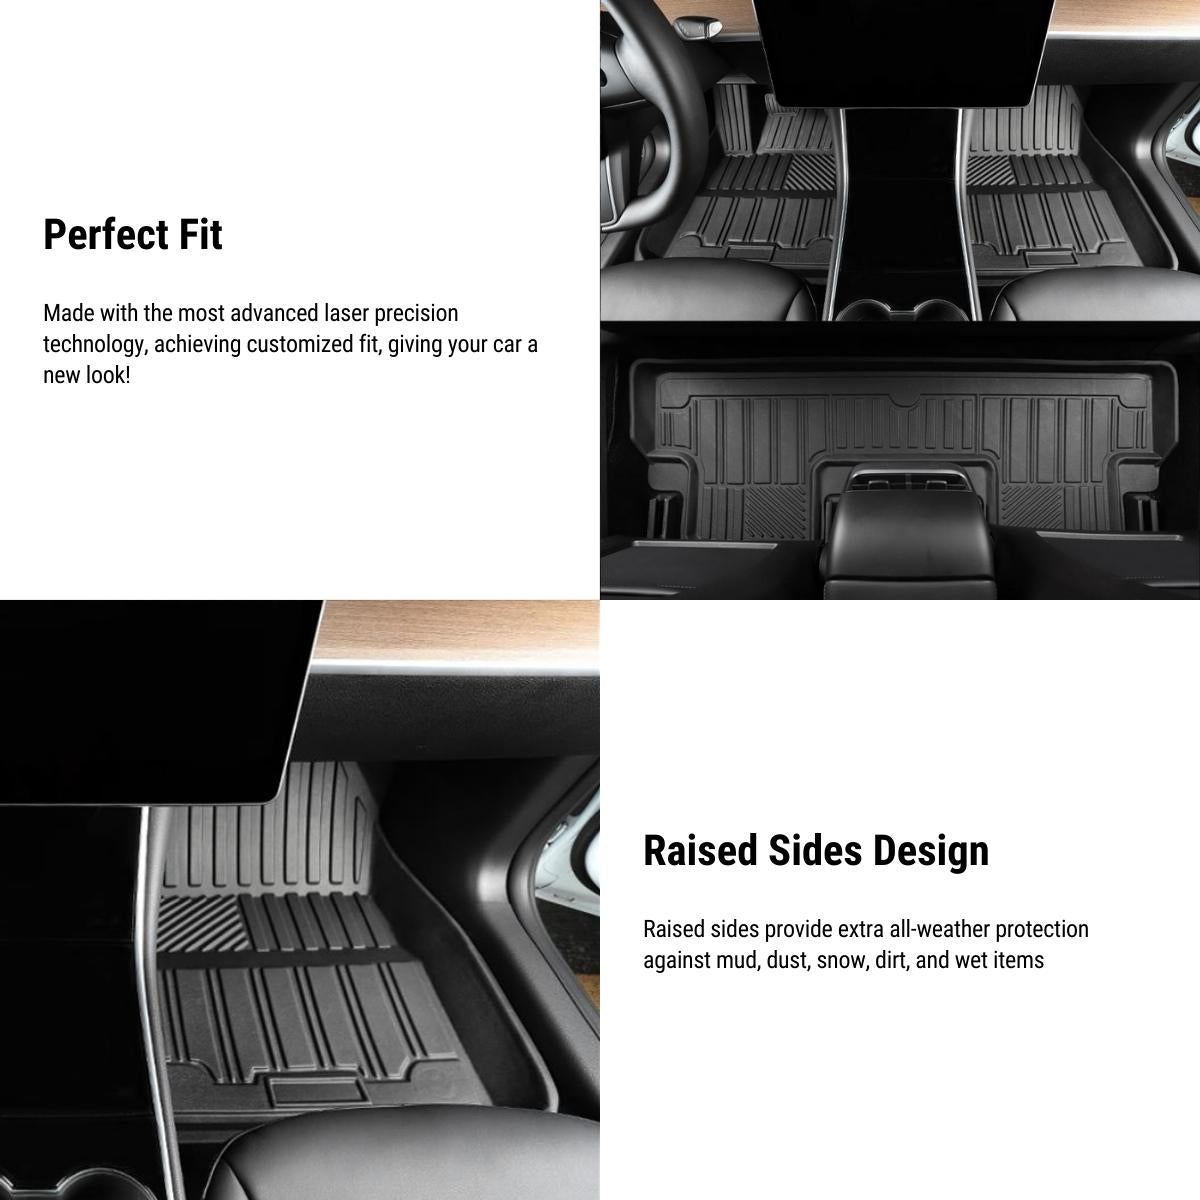 TPE All-Weather Floor Mats for Tesla Model S 2016-2020 - Tesery Official Store